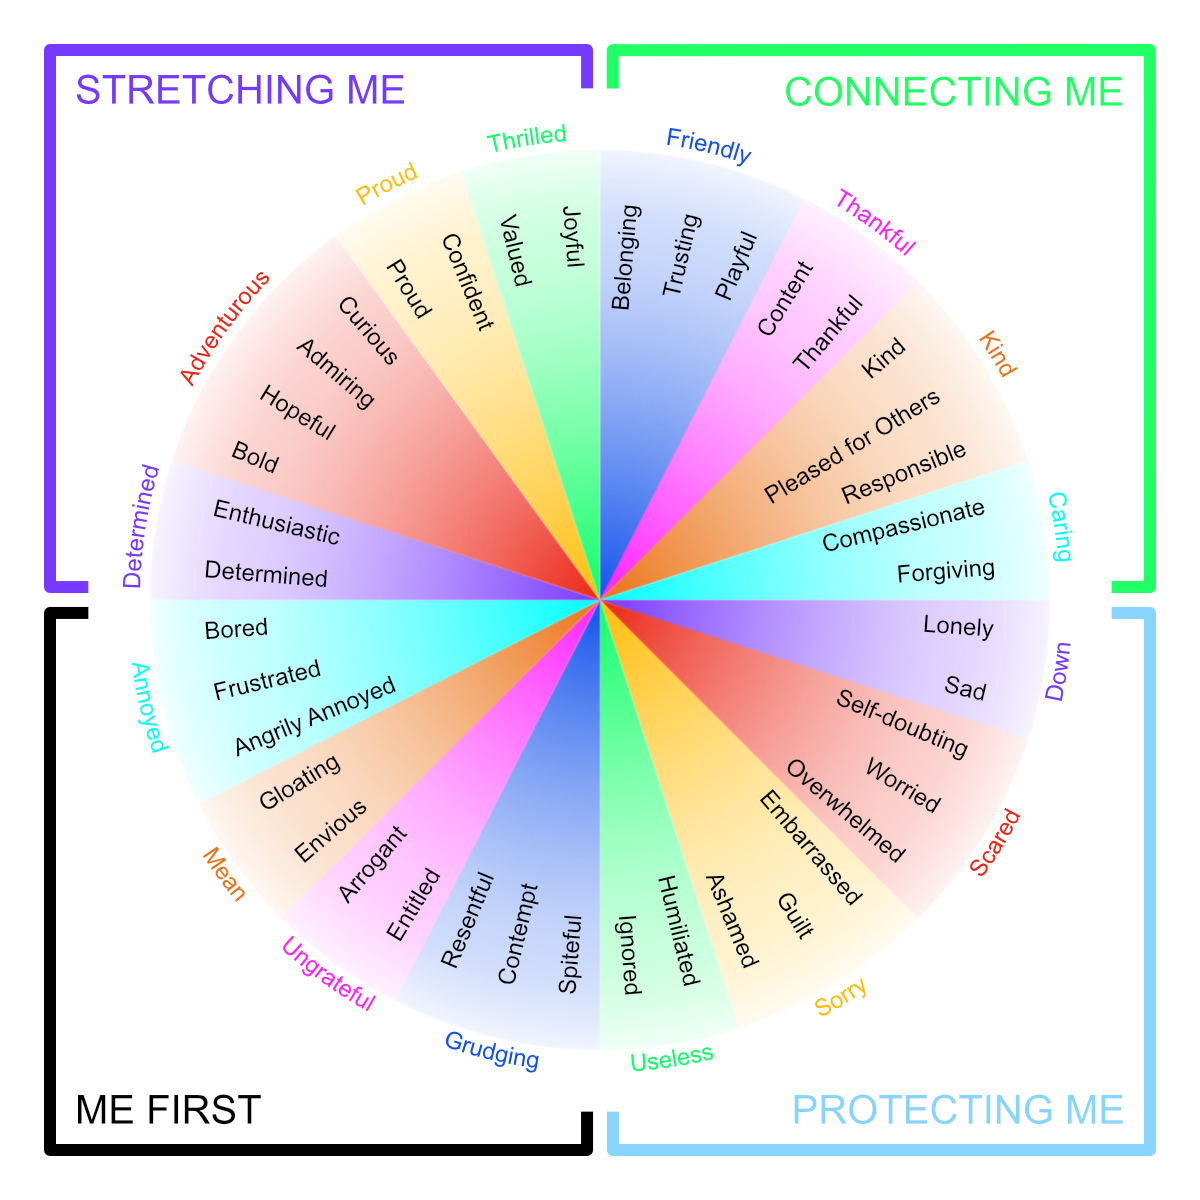 Ring of Emotion. Quadrants labels with short summary: (9-12 o-clock)Stretching Me - to feel good by aluing ourselves; (12-3 o-clock) Connecting Me - to feel good by valuing our connection with others; (3-6 o-clock) Protecting Me - to avoid feeling any worse by undervaluing ourselves; (6-9 o-clock) Me First - to feel better about ourselves by de-valuing others.